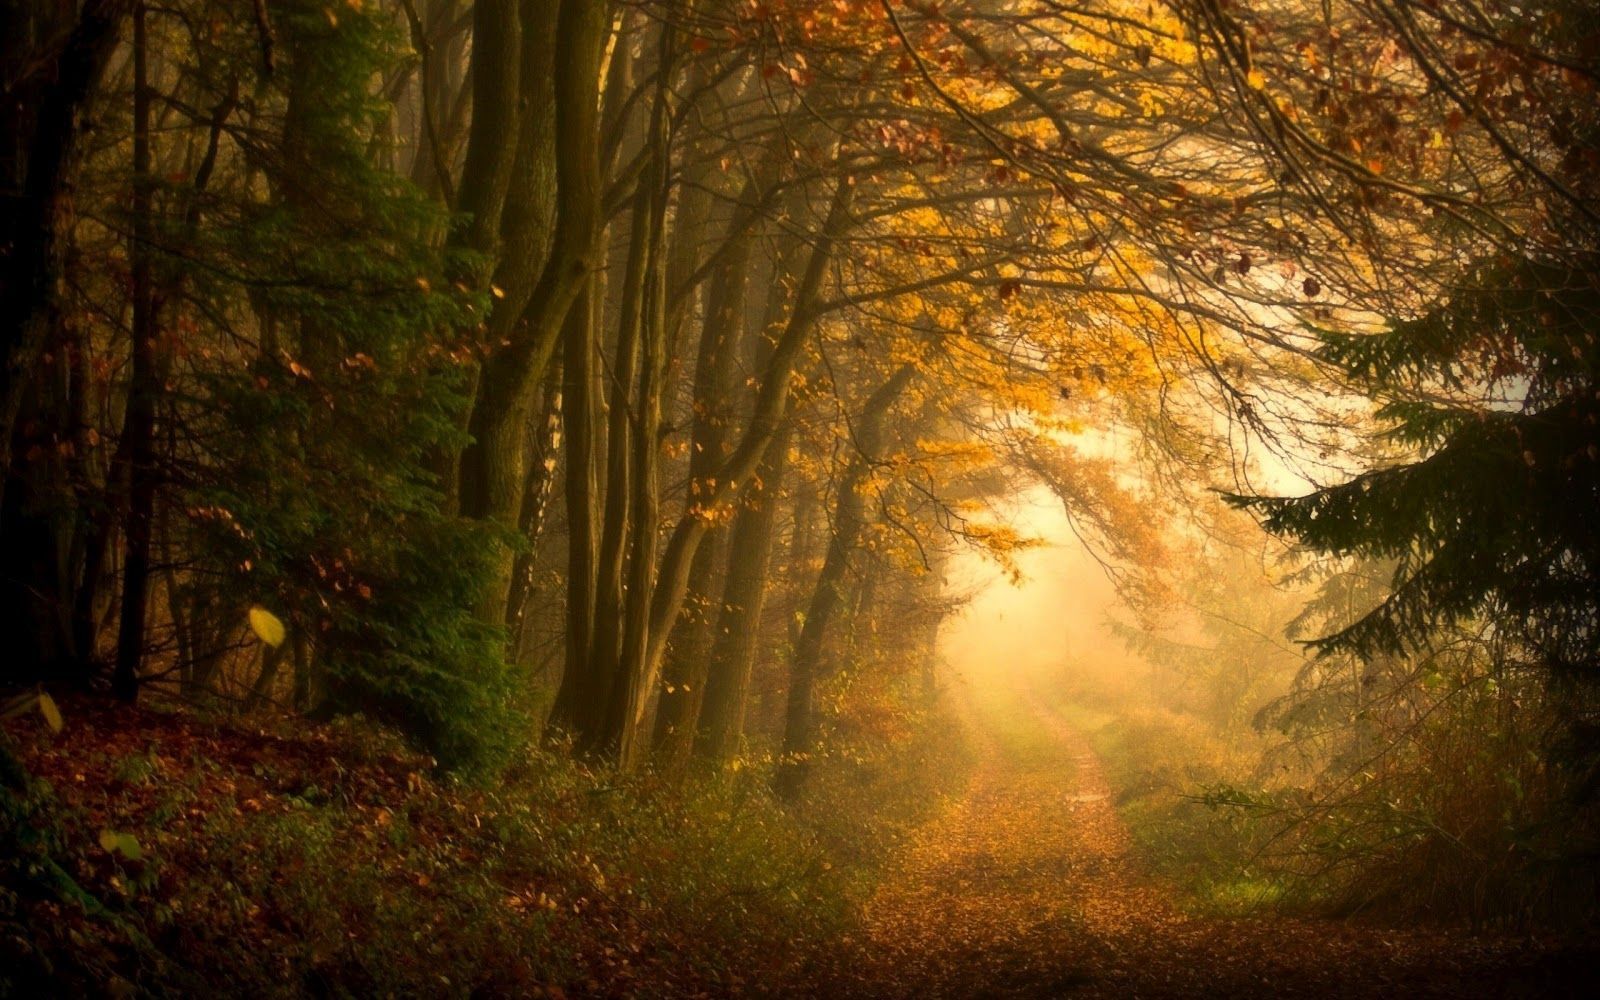 Roads that lead ever on and on. Autumn forest, Autumn scenery, Forest path